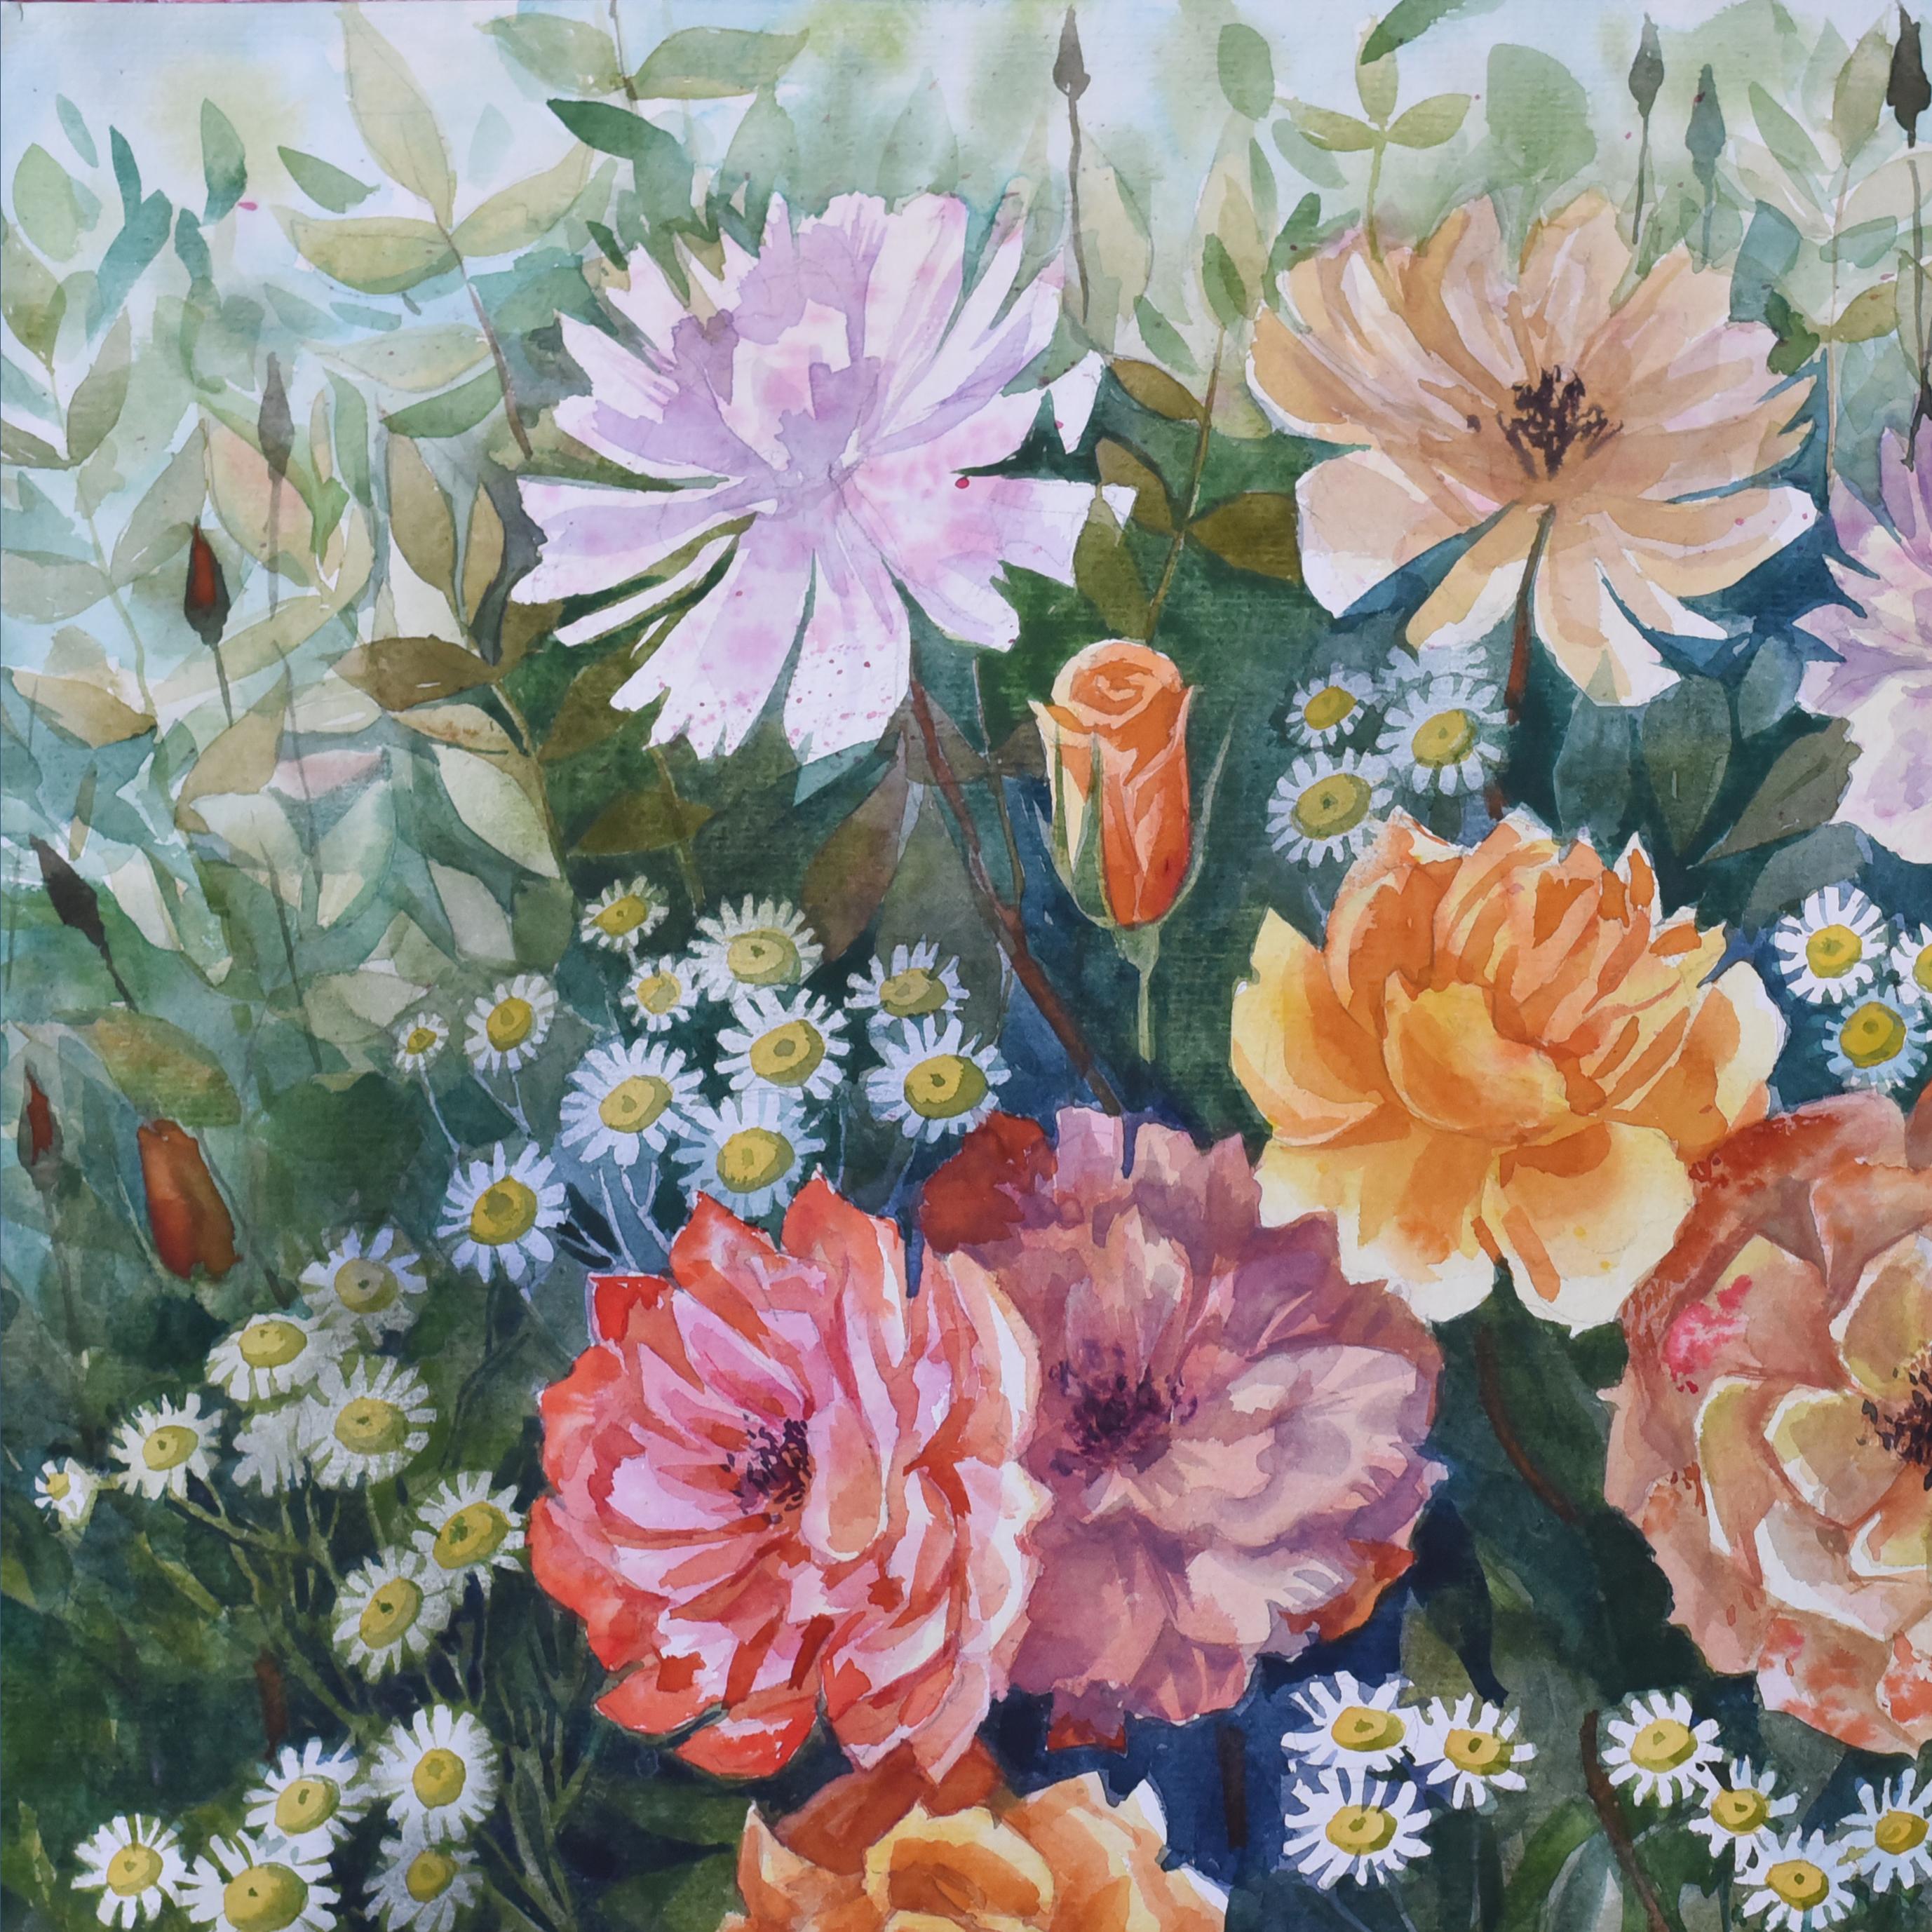 Roses from my garden - Painting by Elena Shichko